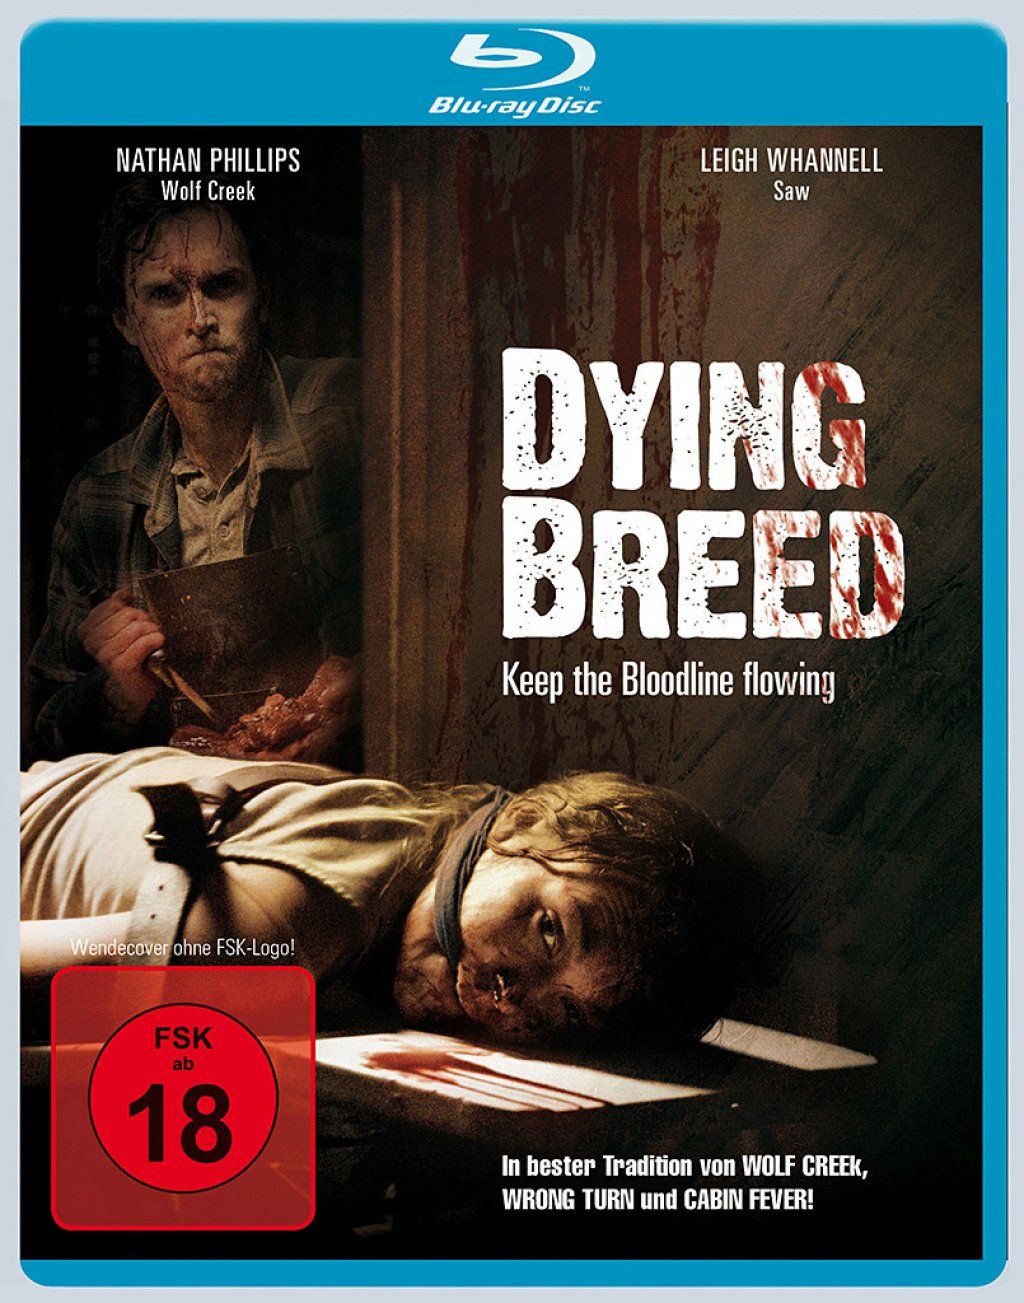 Dying Breed - Keep the Bloodline flowing (Uncut) (BLURAY)